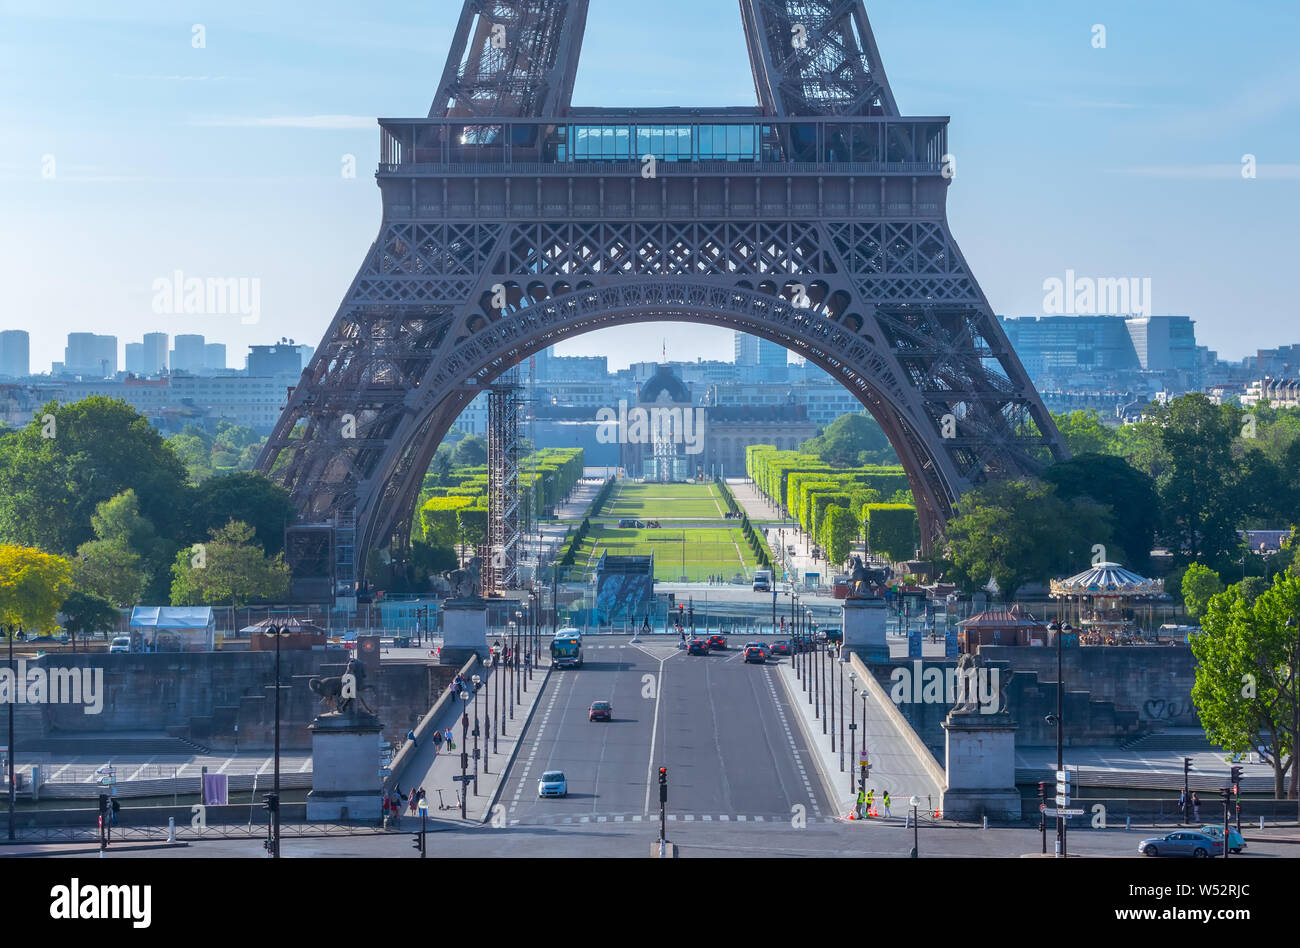 France, Paris. Eiffel Tower and Champ de Mars. Few tourists and cars in the summer sunny morning Stock Photo